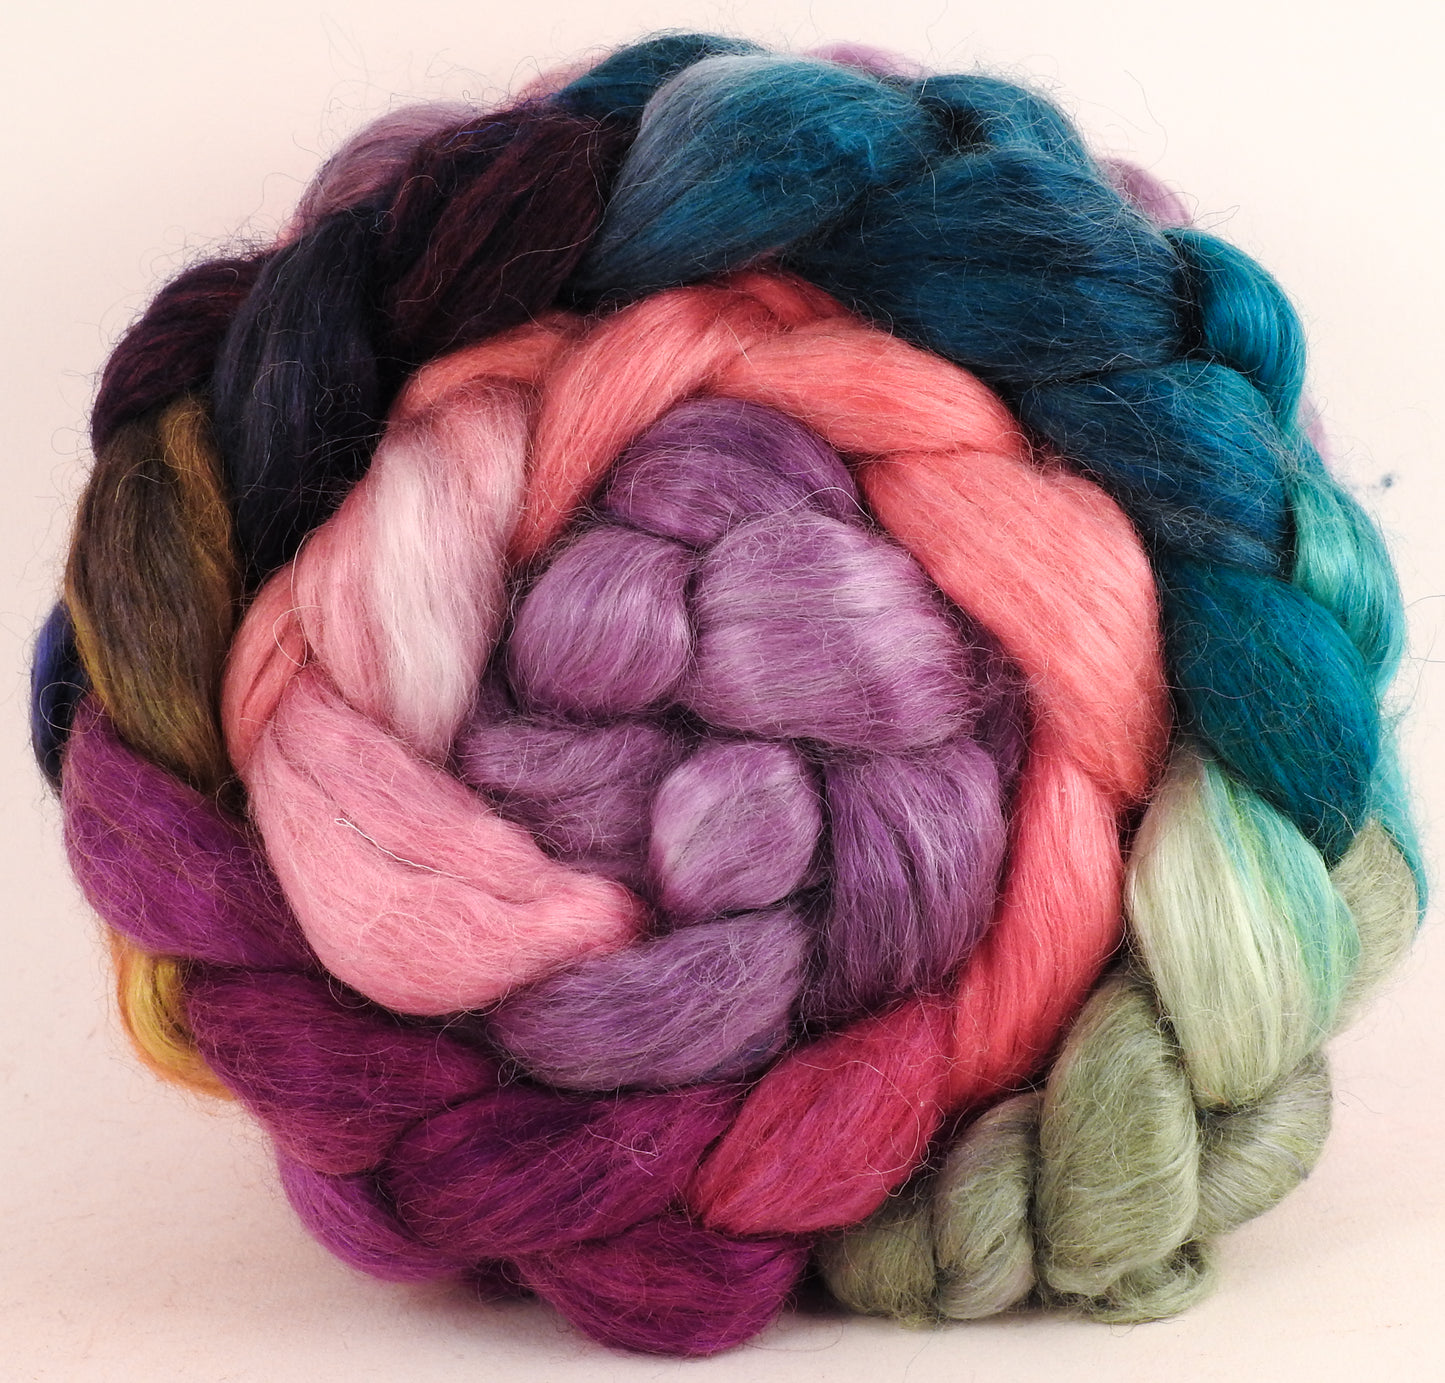 Hand-dyed wensleydale/ mulberry silk roving (65/35) -Color Me Happy - (5.5 oz.)